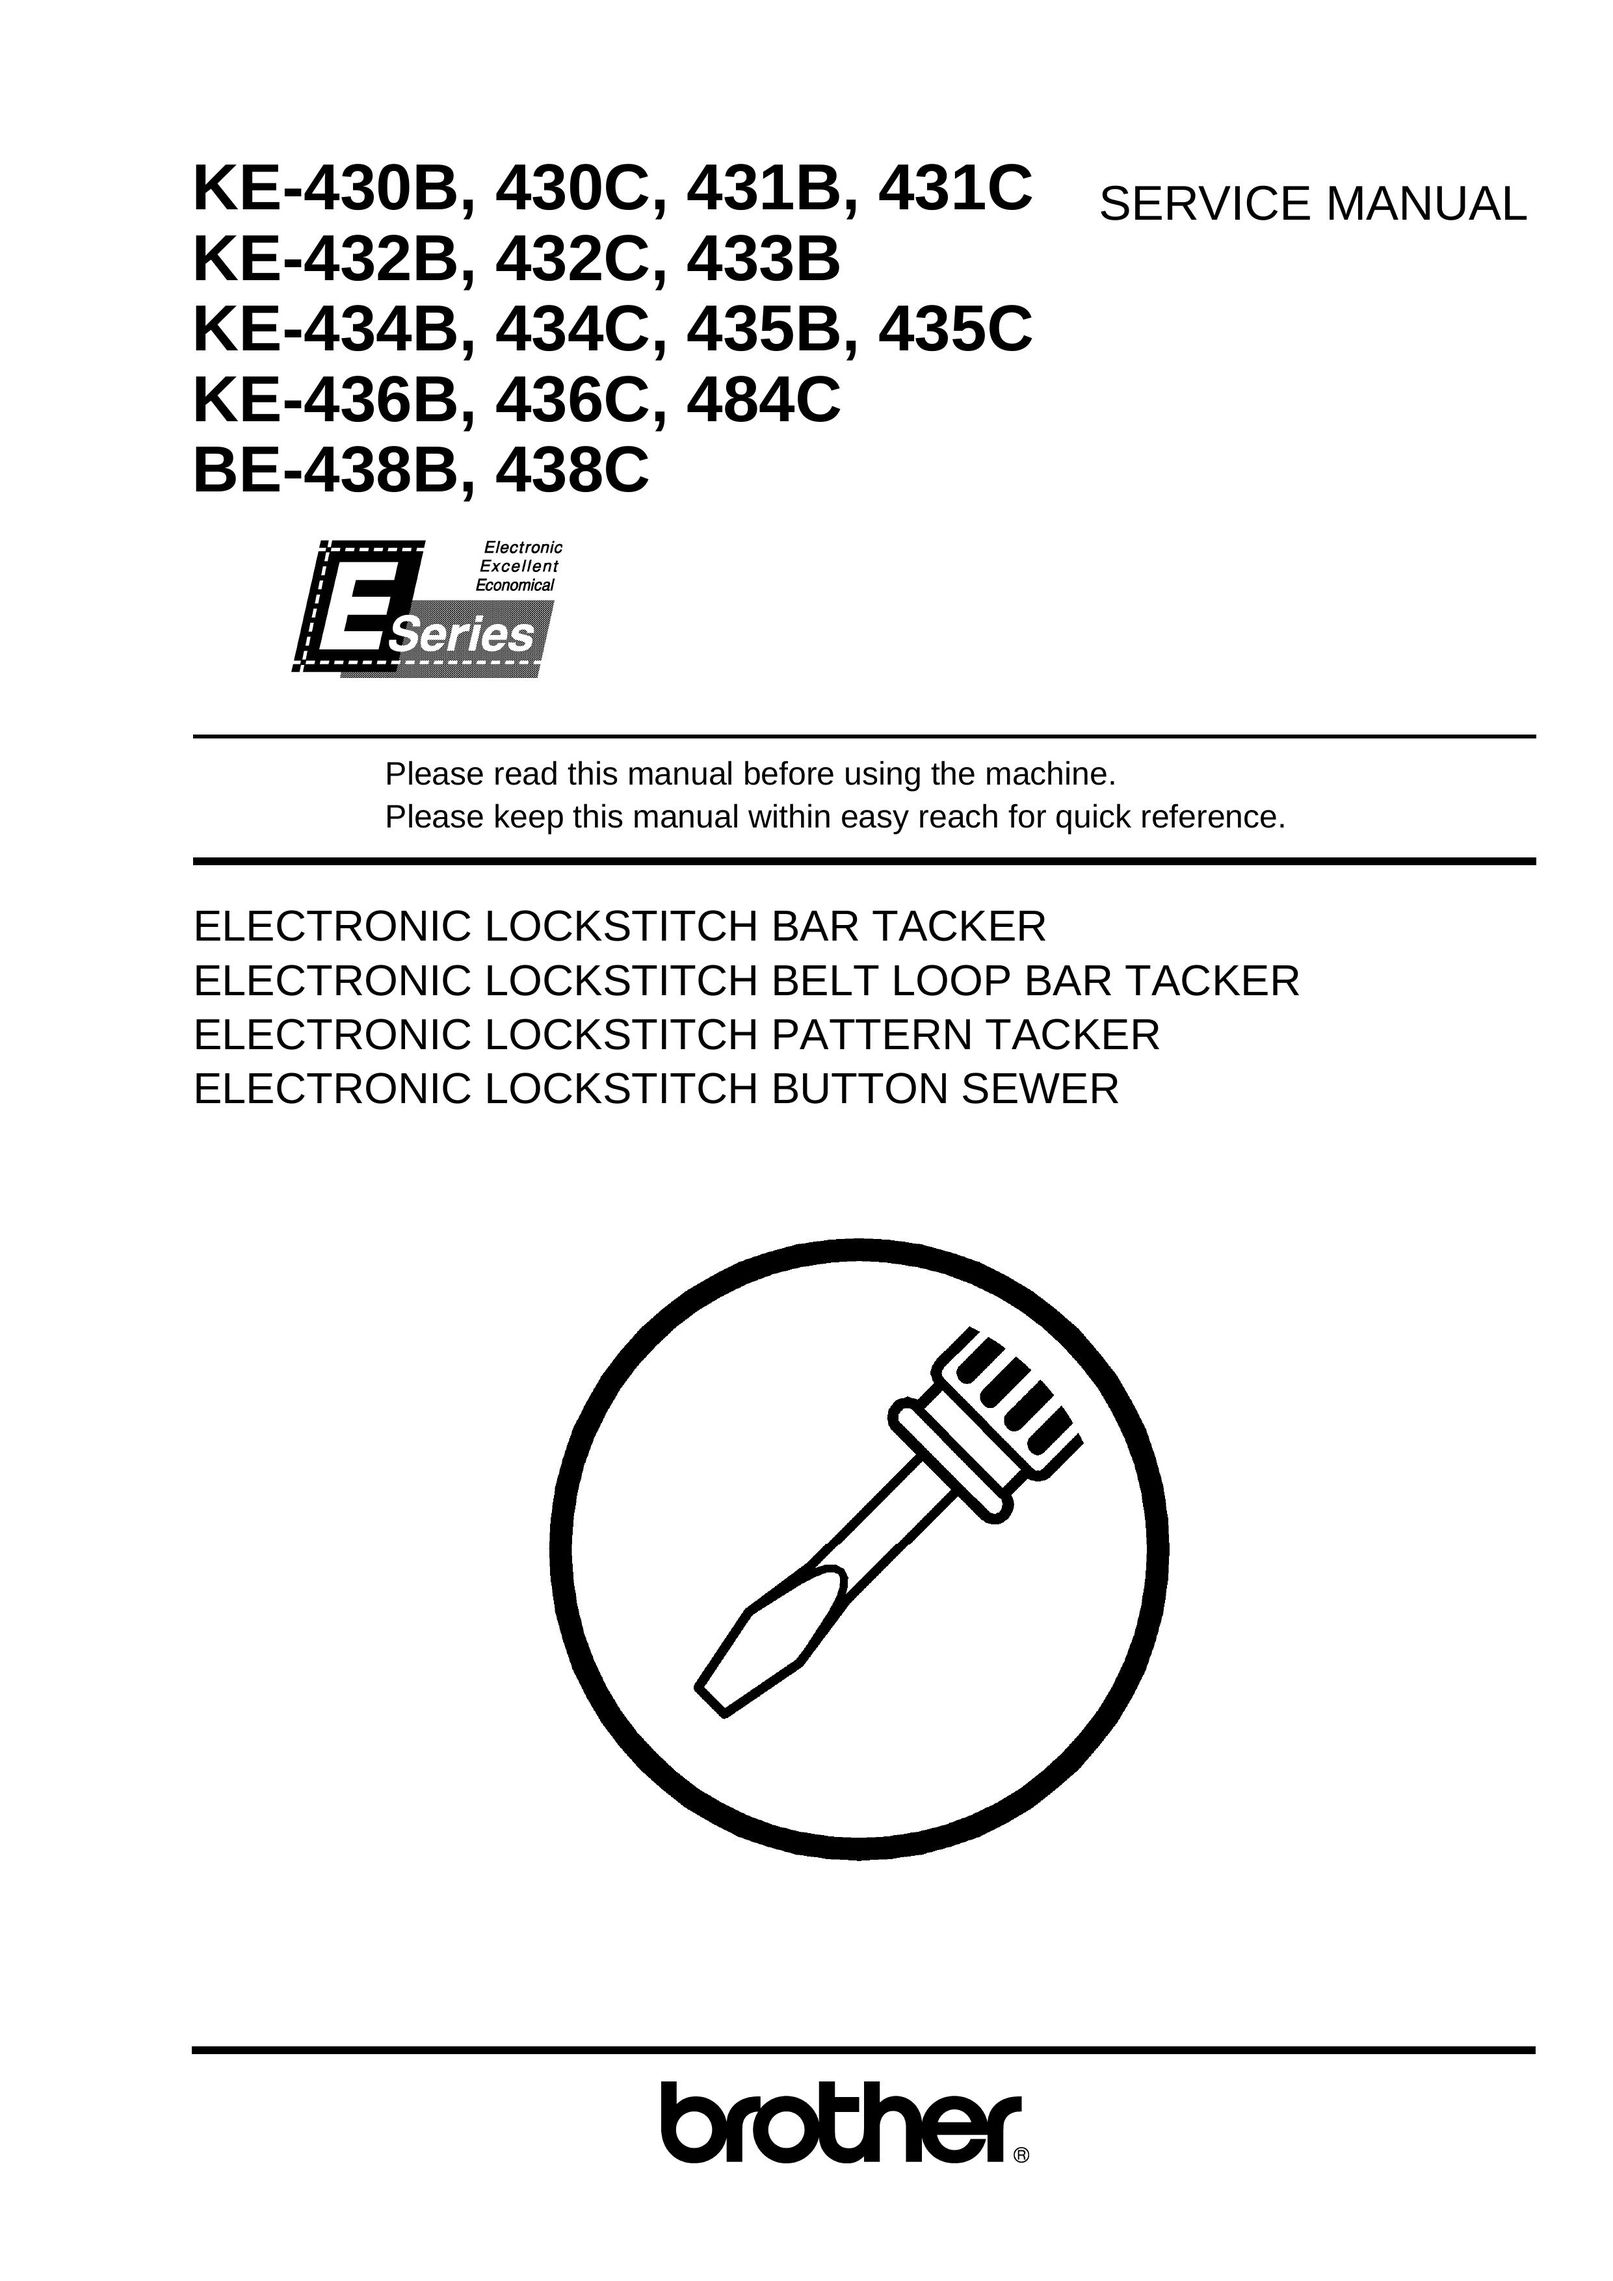 Brother 435C Sewing Machine User Manual